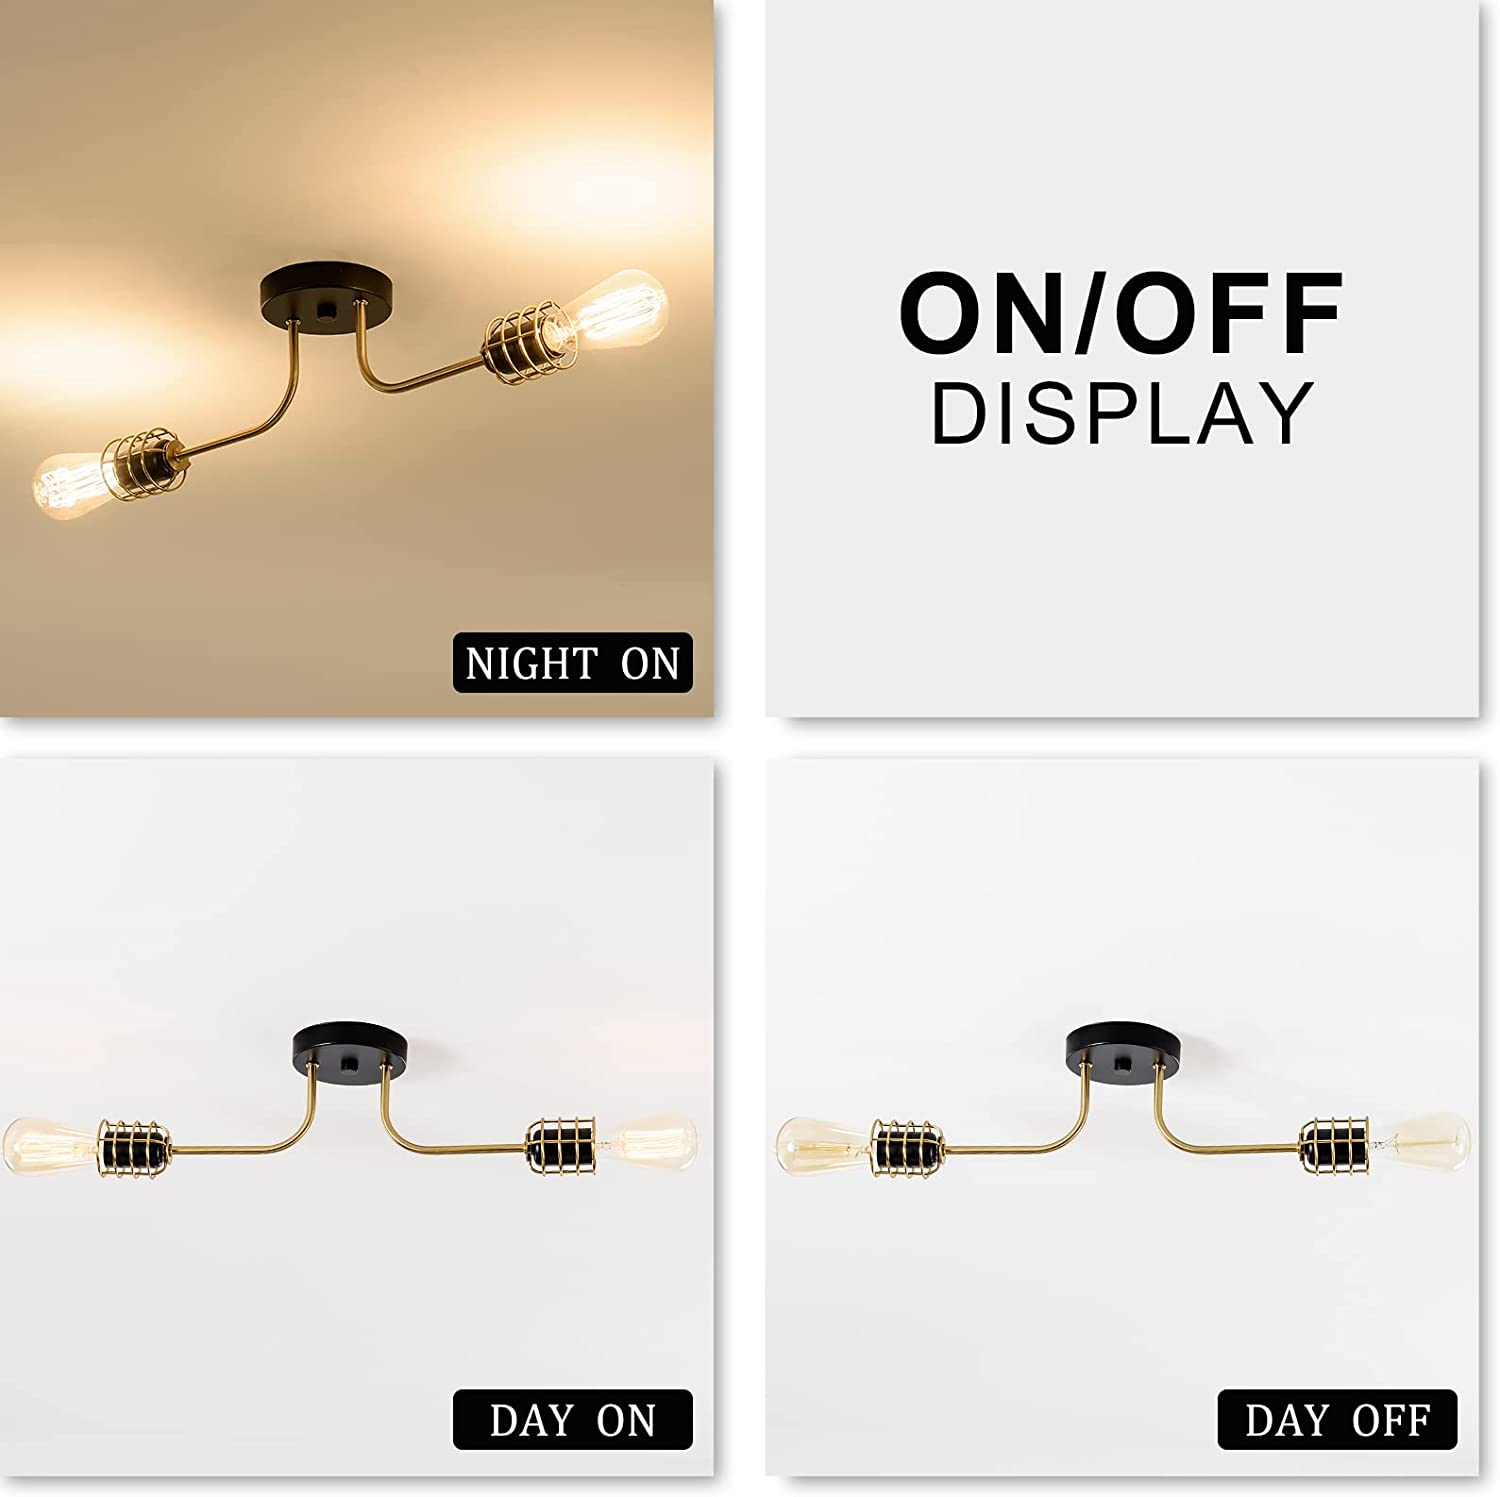 2 light industrial semi flush mount ceiling light adjustable ceiling lamp with gold and black finish